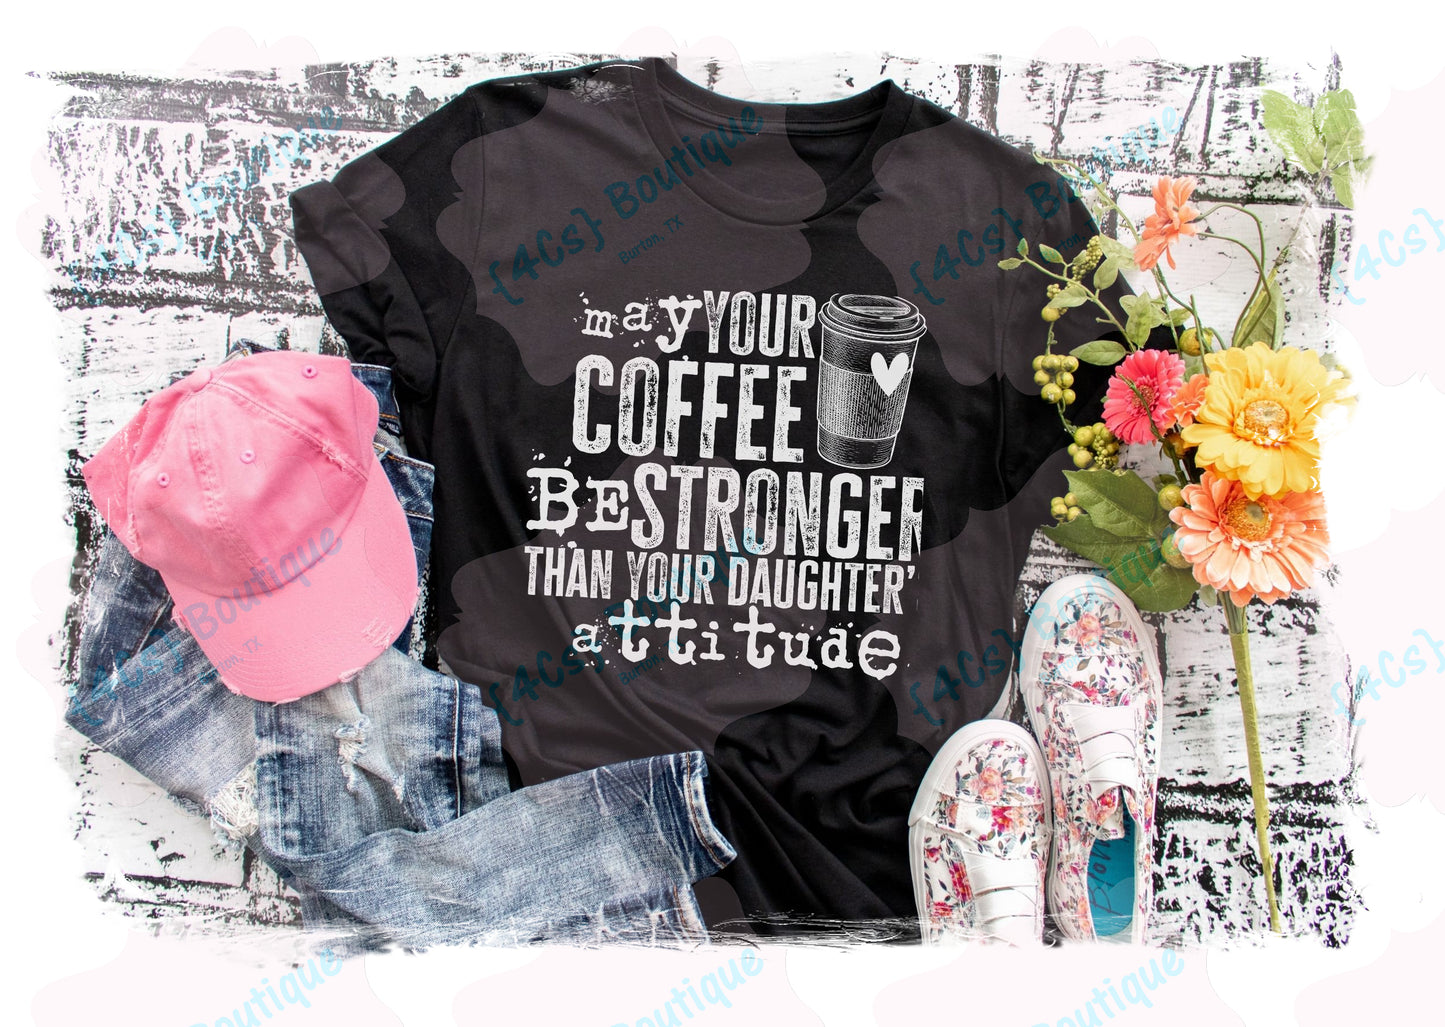 May Your Coffee Be Stronger Than Your Daughter's Attitude Shirt